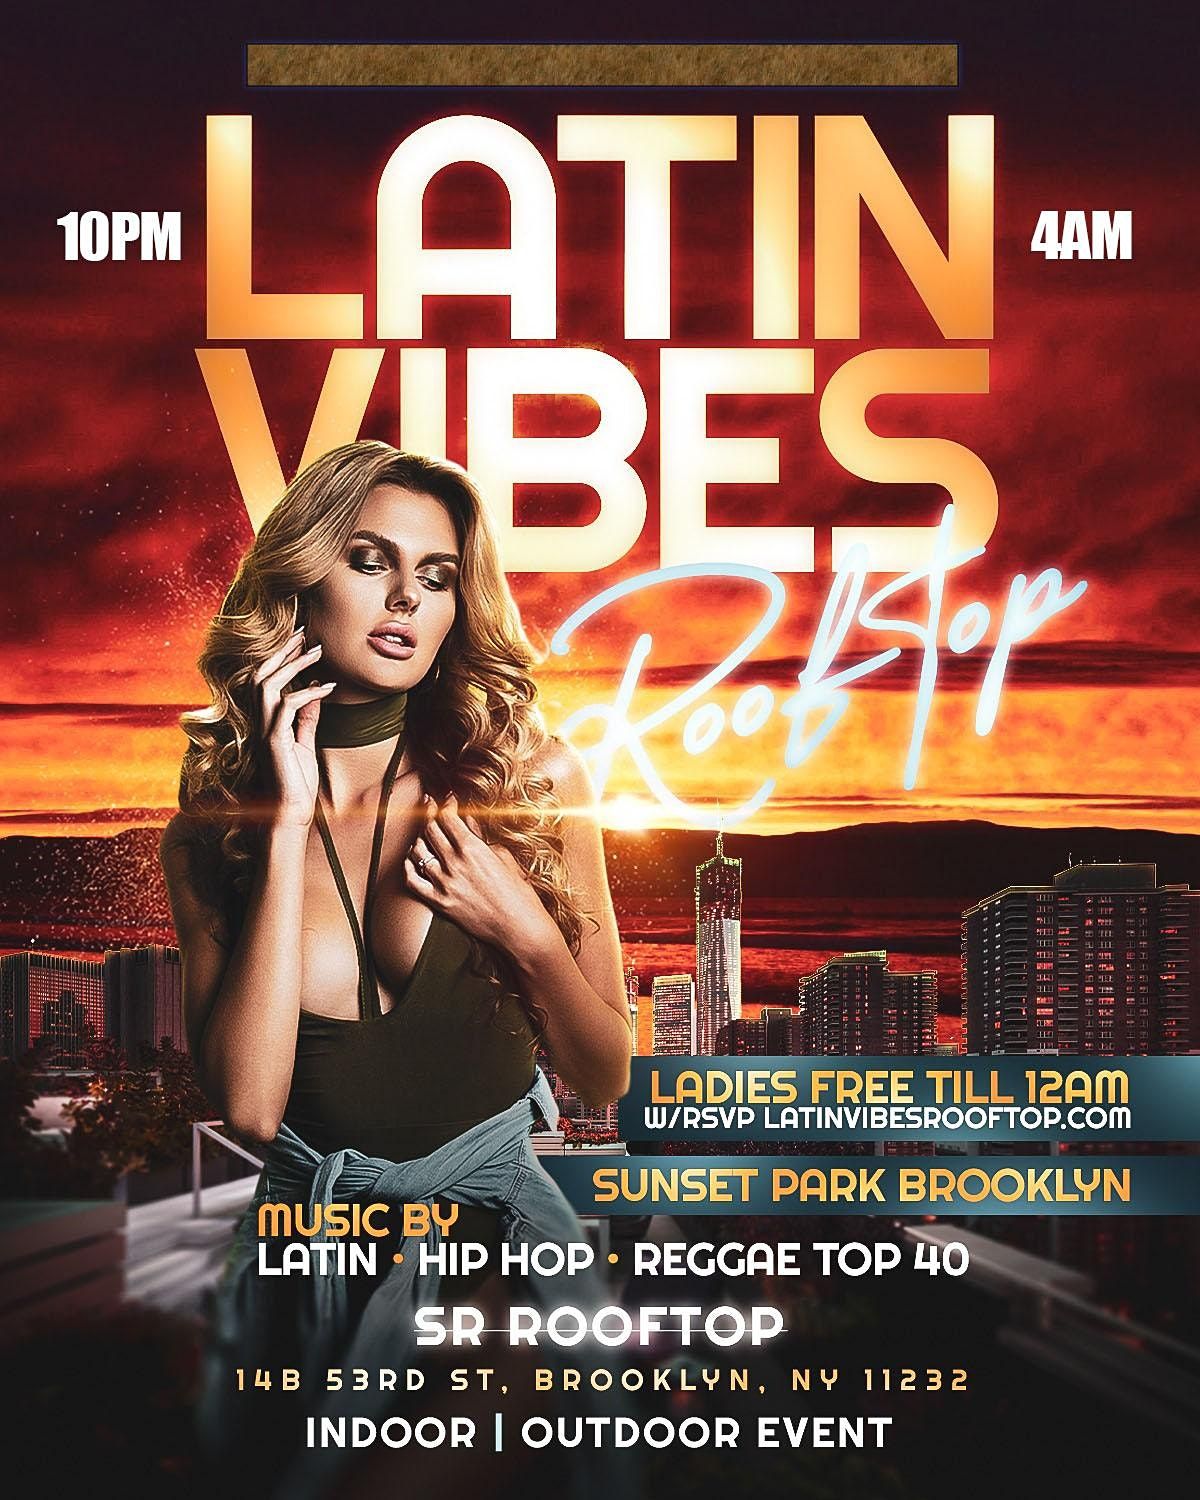 LATIN VIBES ROOFTOP